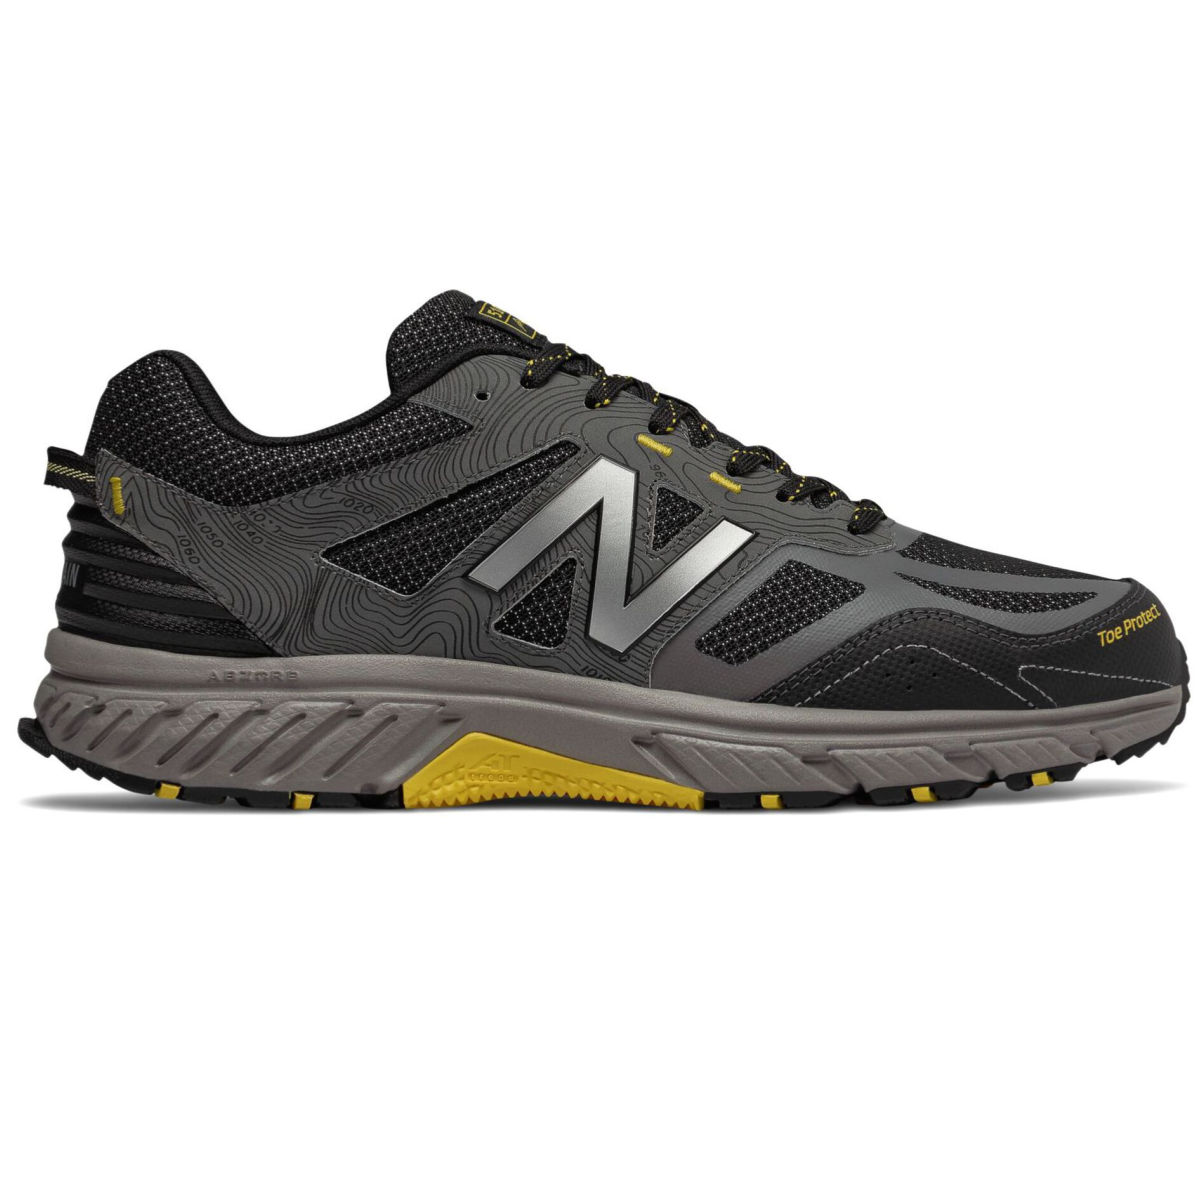 New Balance 510 v4 Extra Wide Men's Trail Running Shoes